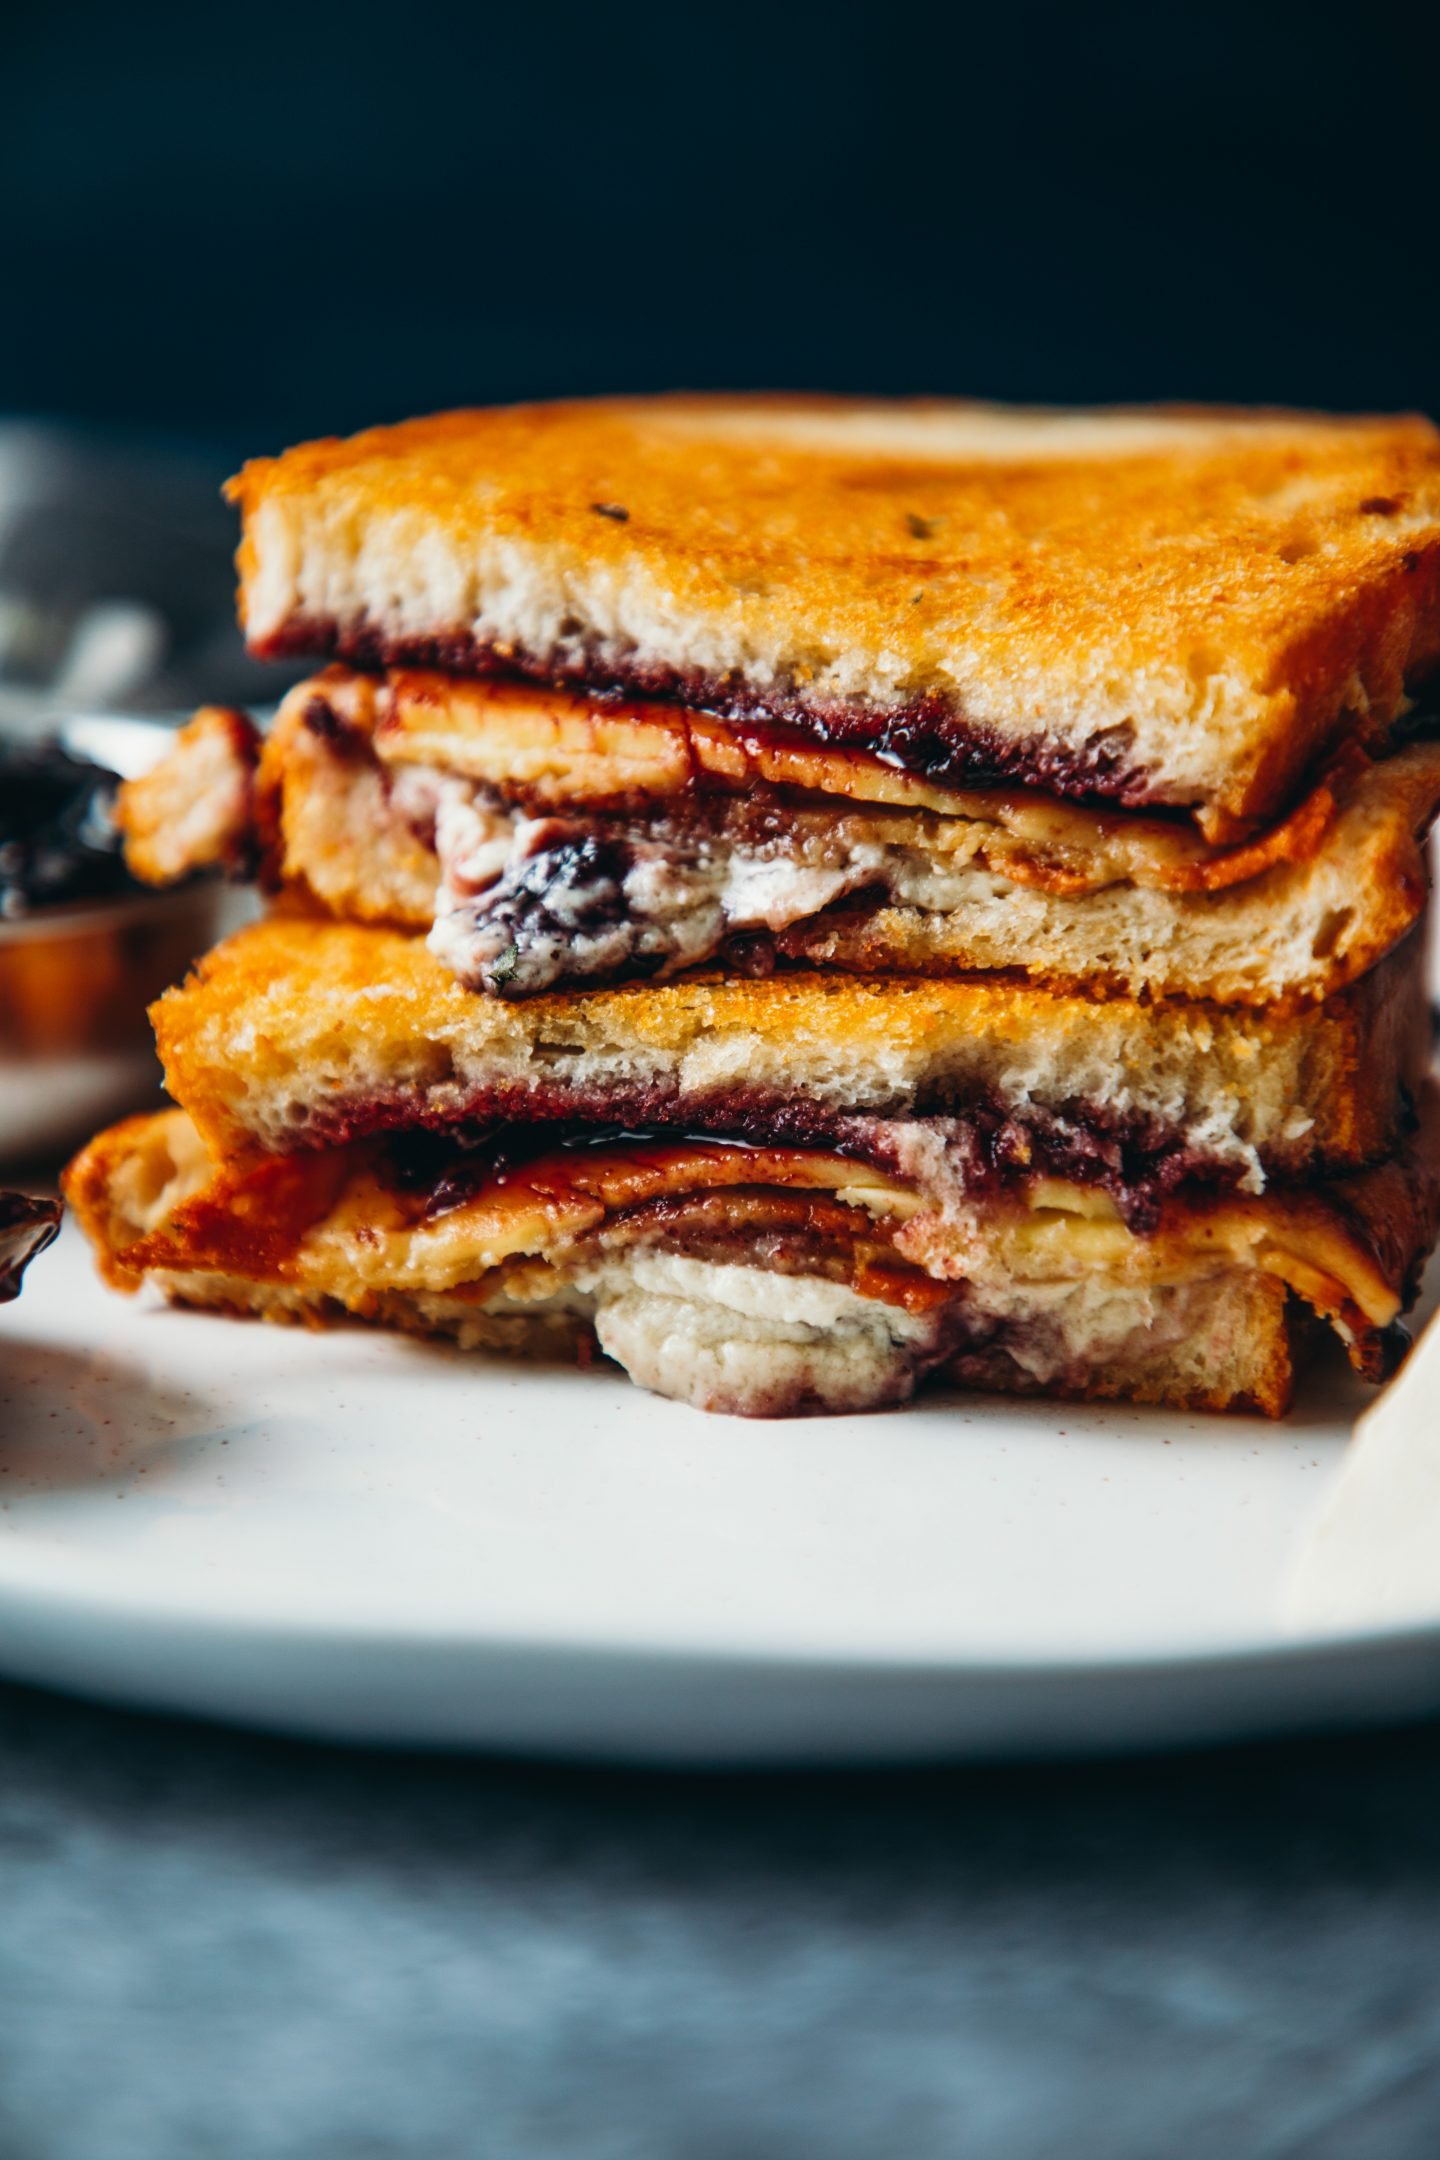 Blackberry Brie & Bacon Grilled Cheese